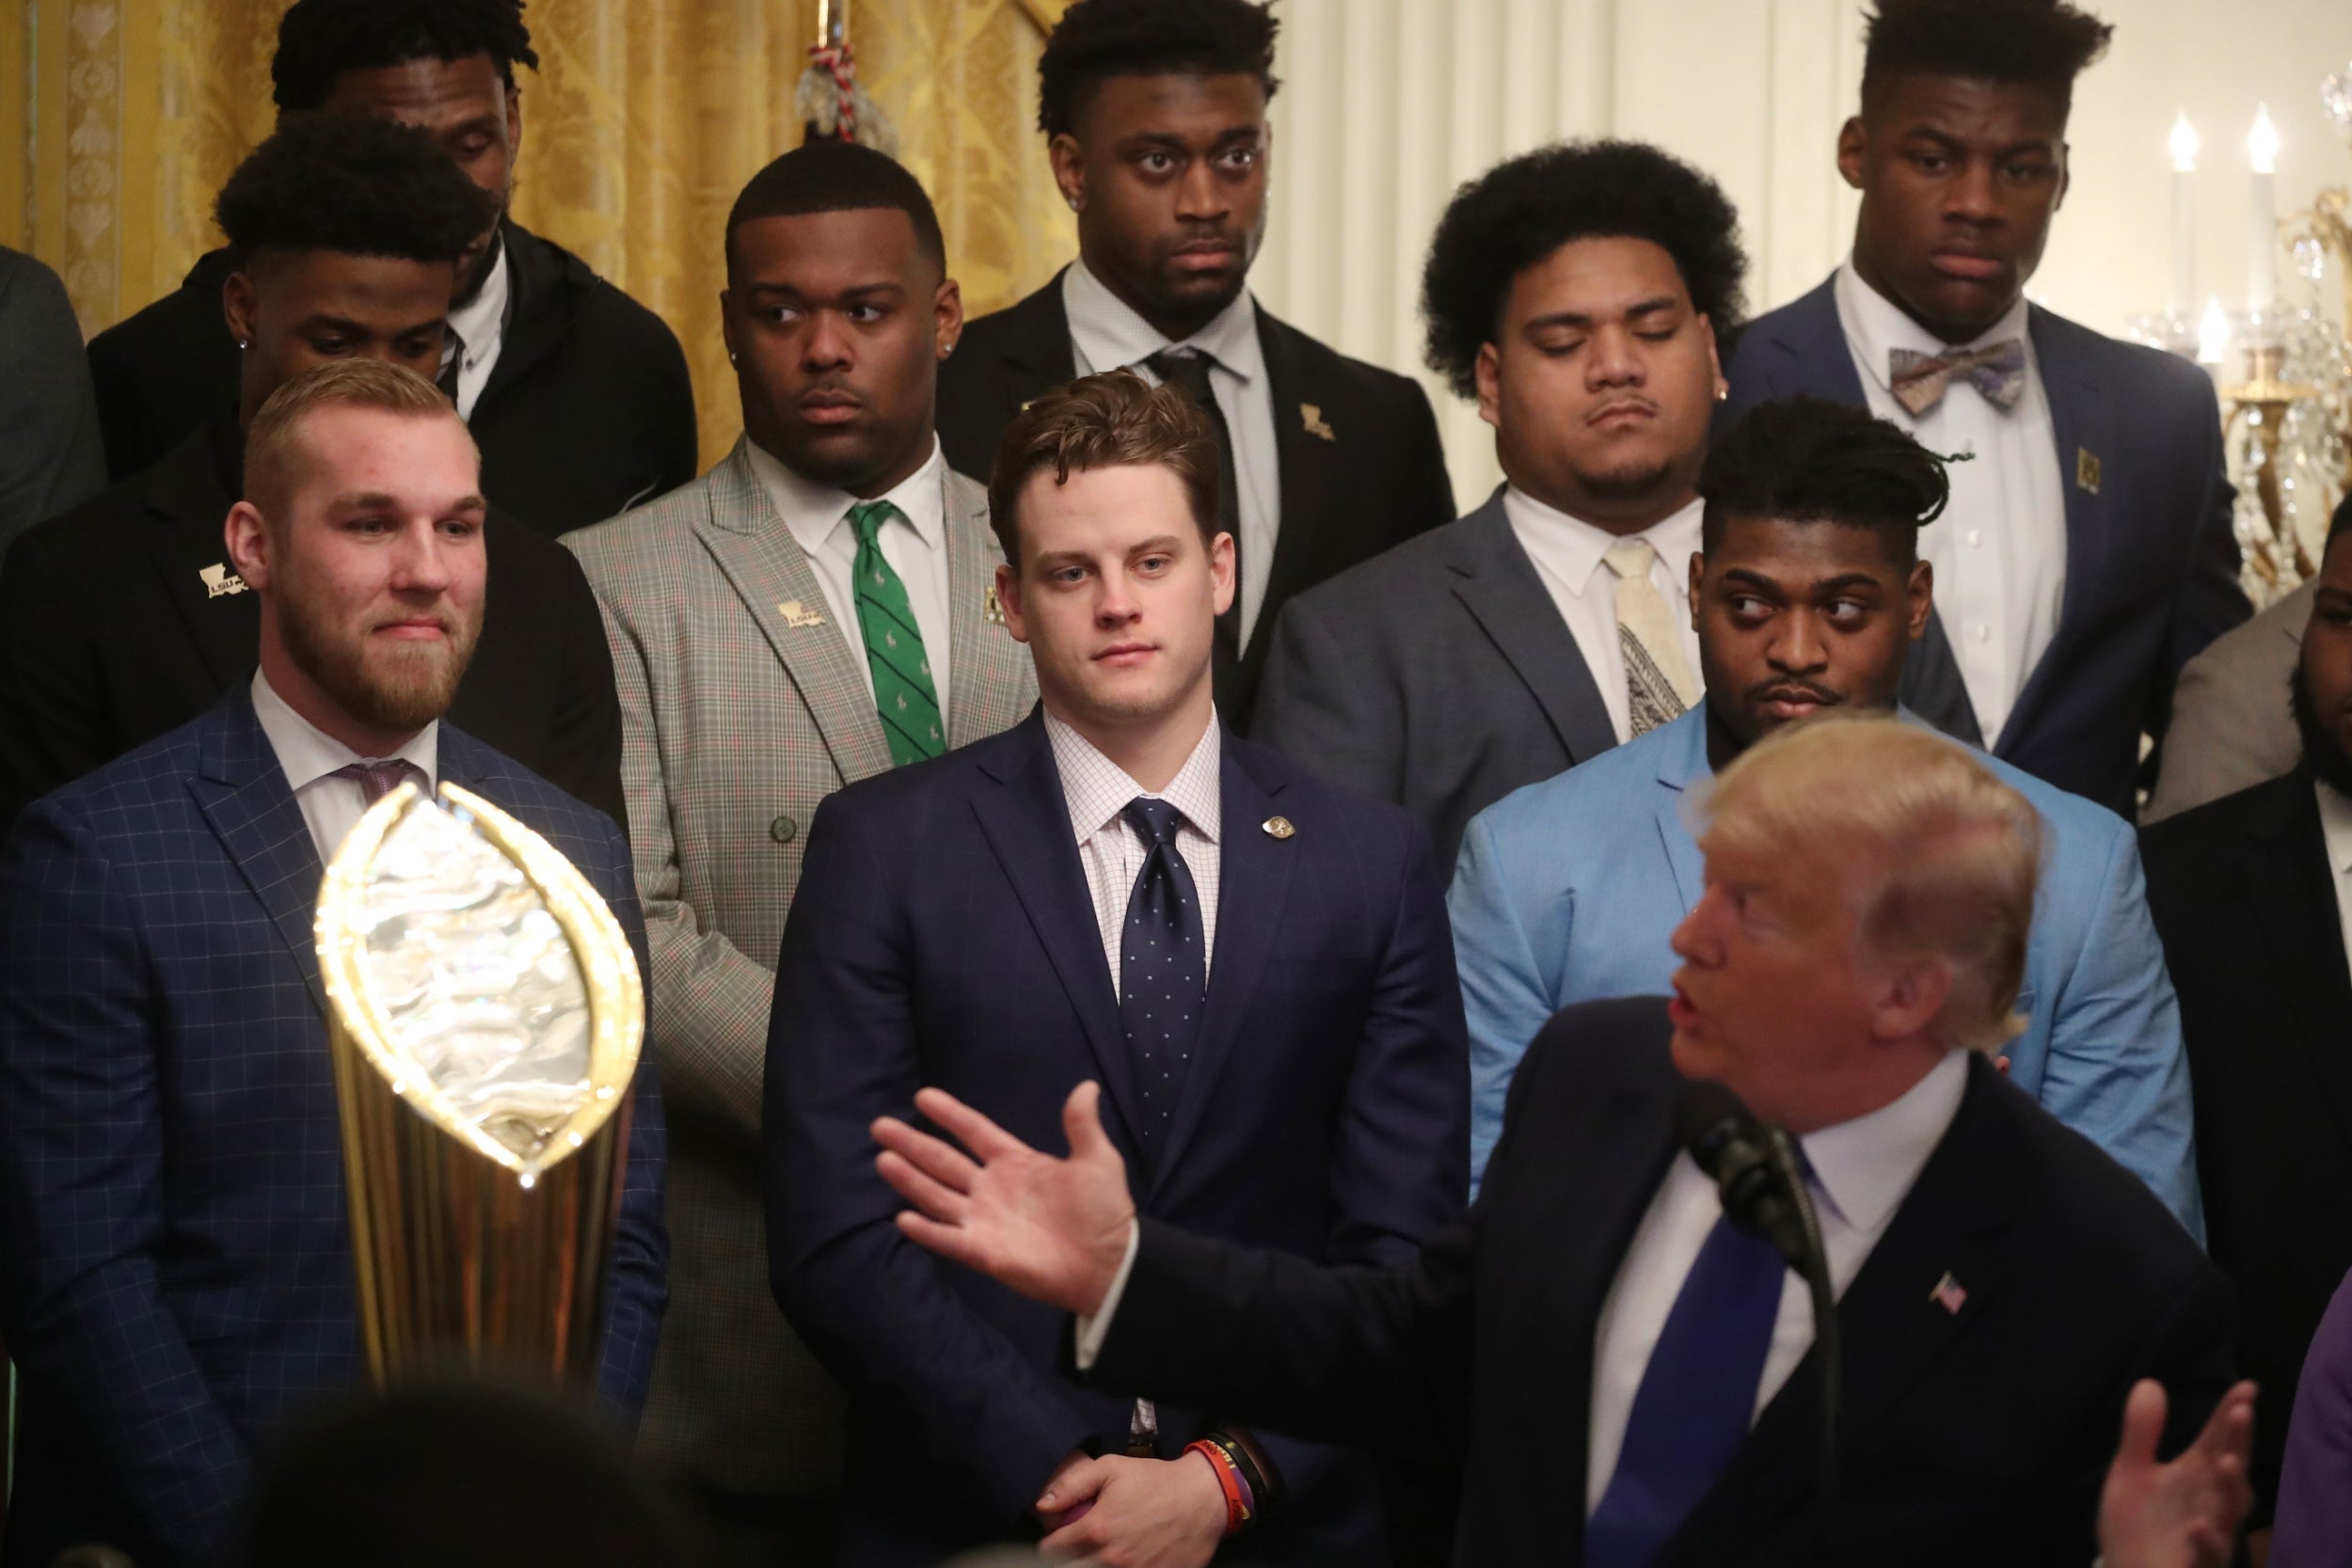 'They're trying to impeach the son of a b****': Trump jokes with football team ahead of Senate trial